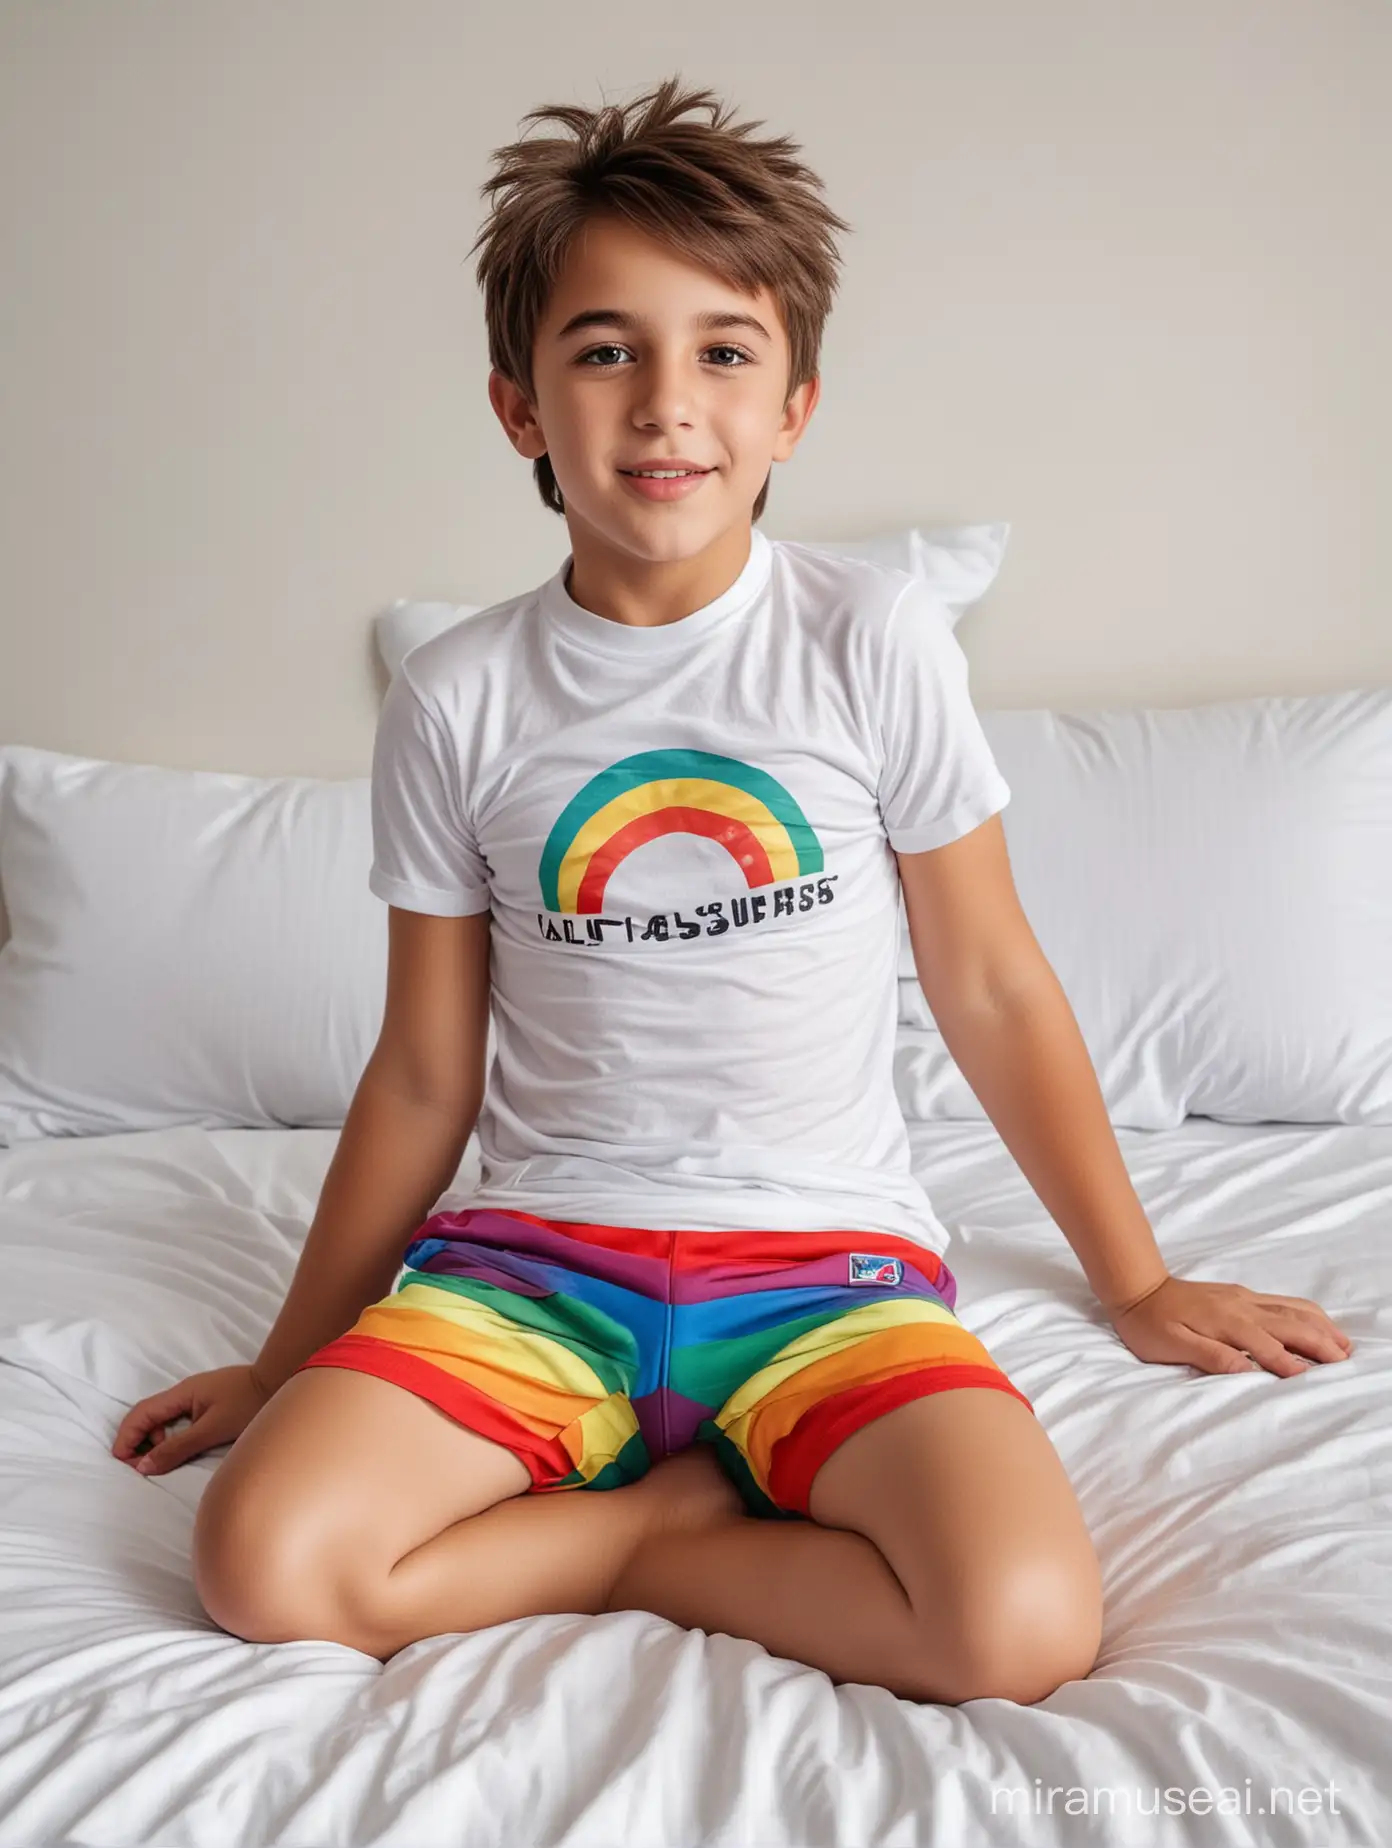 Adorable 12YearOld Turkish Boy in Rainbow Shorts Relaxing on White Bed